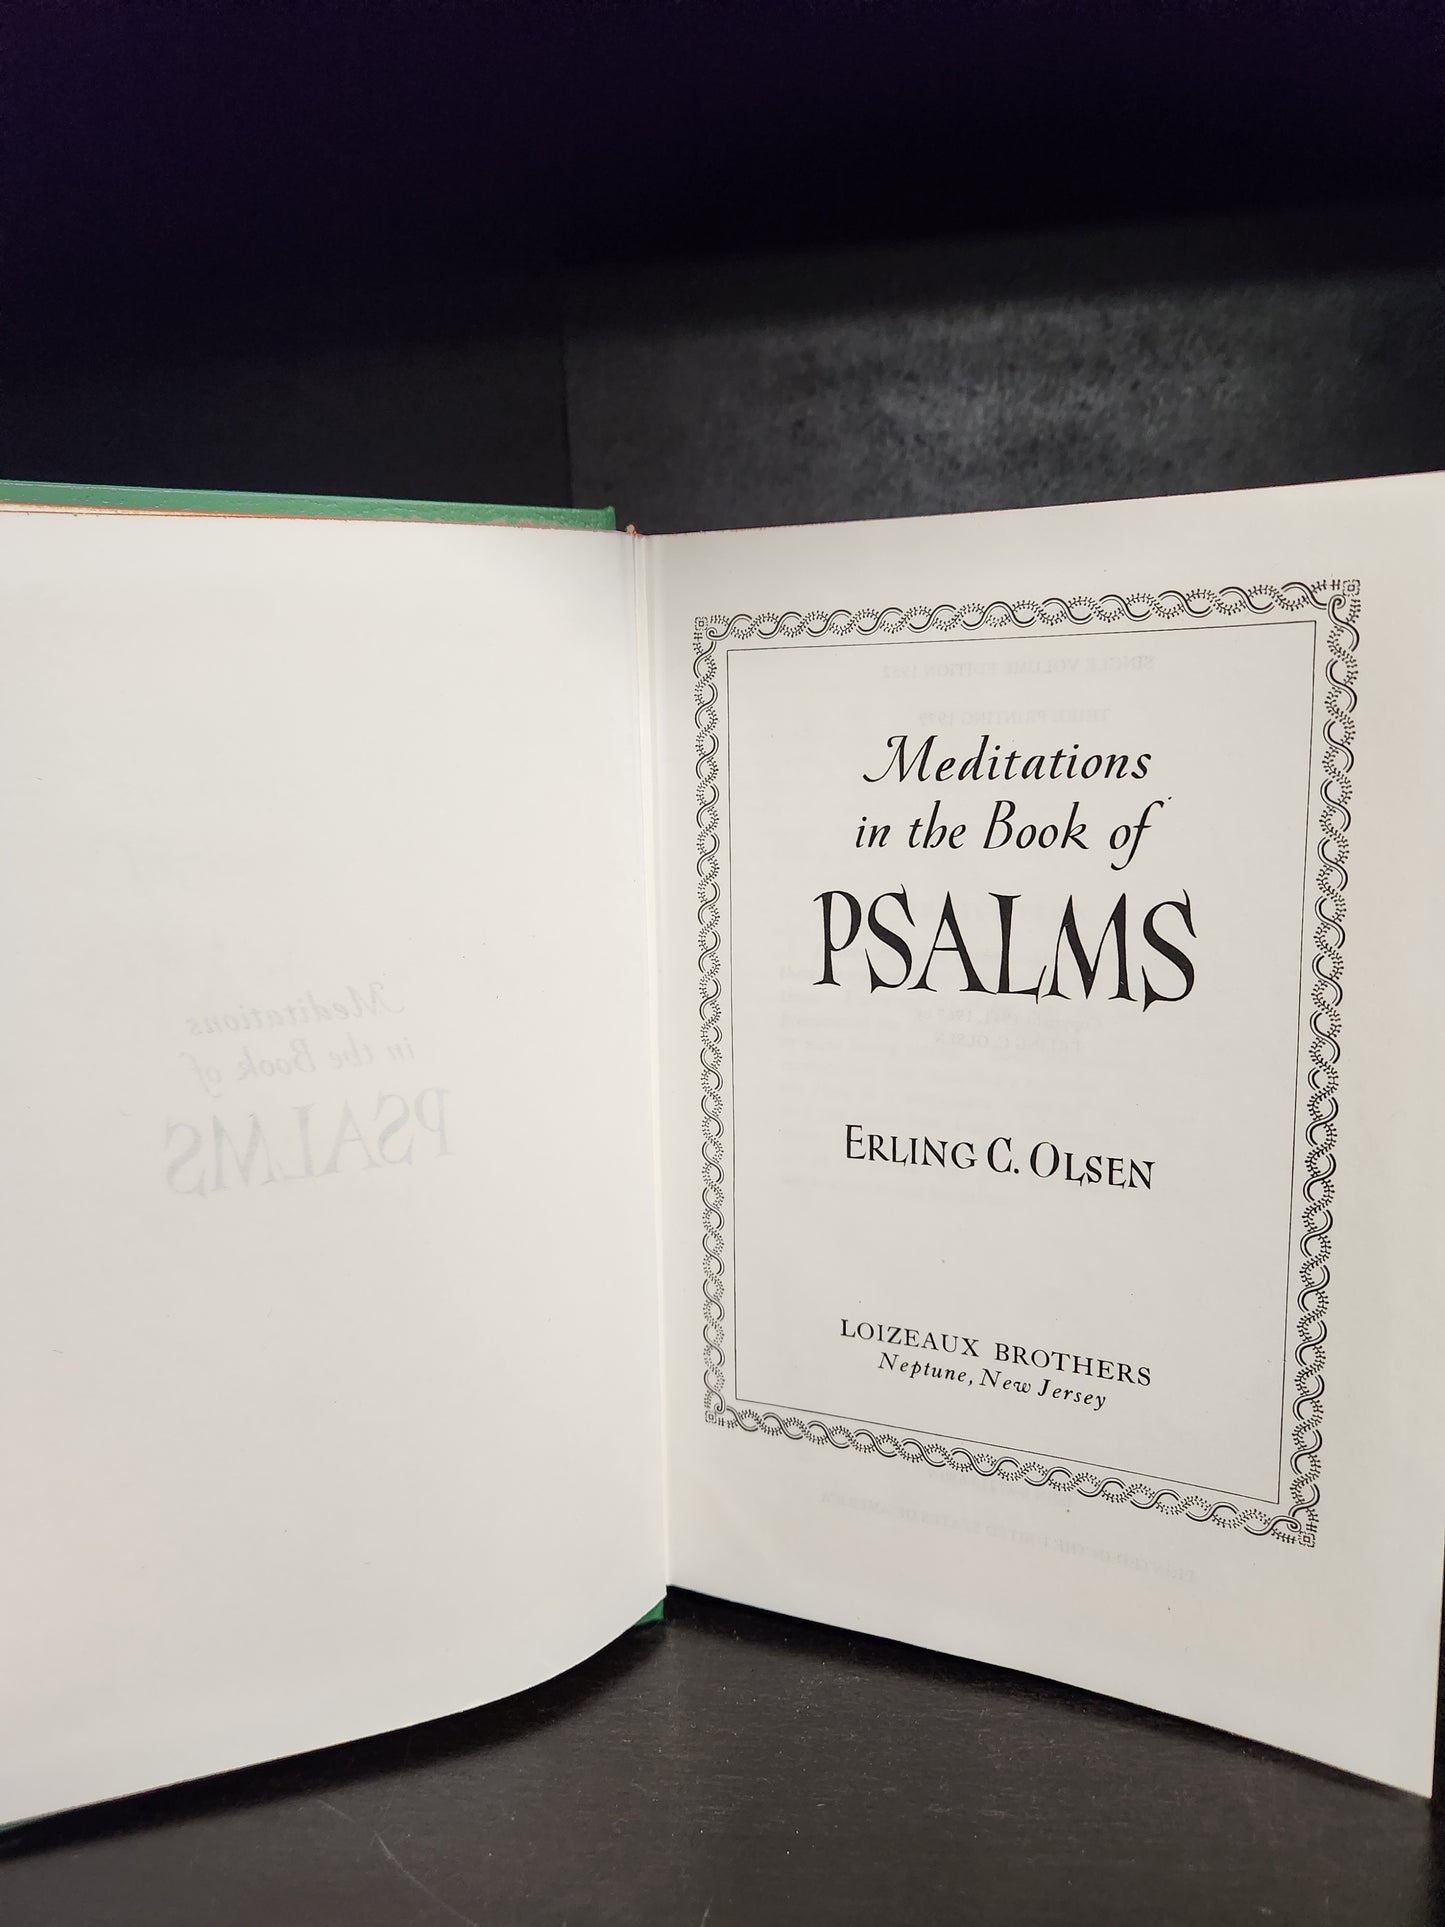 Meditations in the Book of Psalms 3rd Edition by E.C. Olsen - Dead Tree Dreams Bookstore